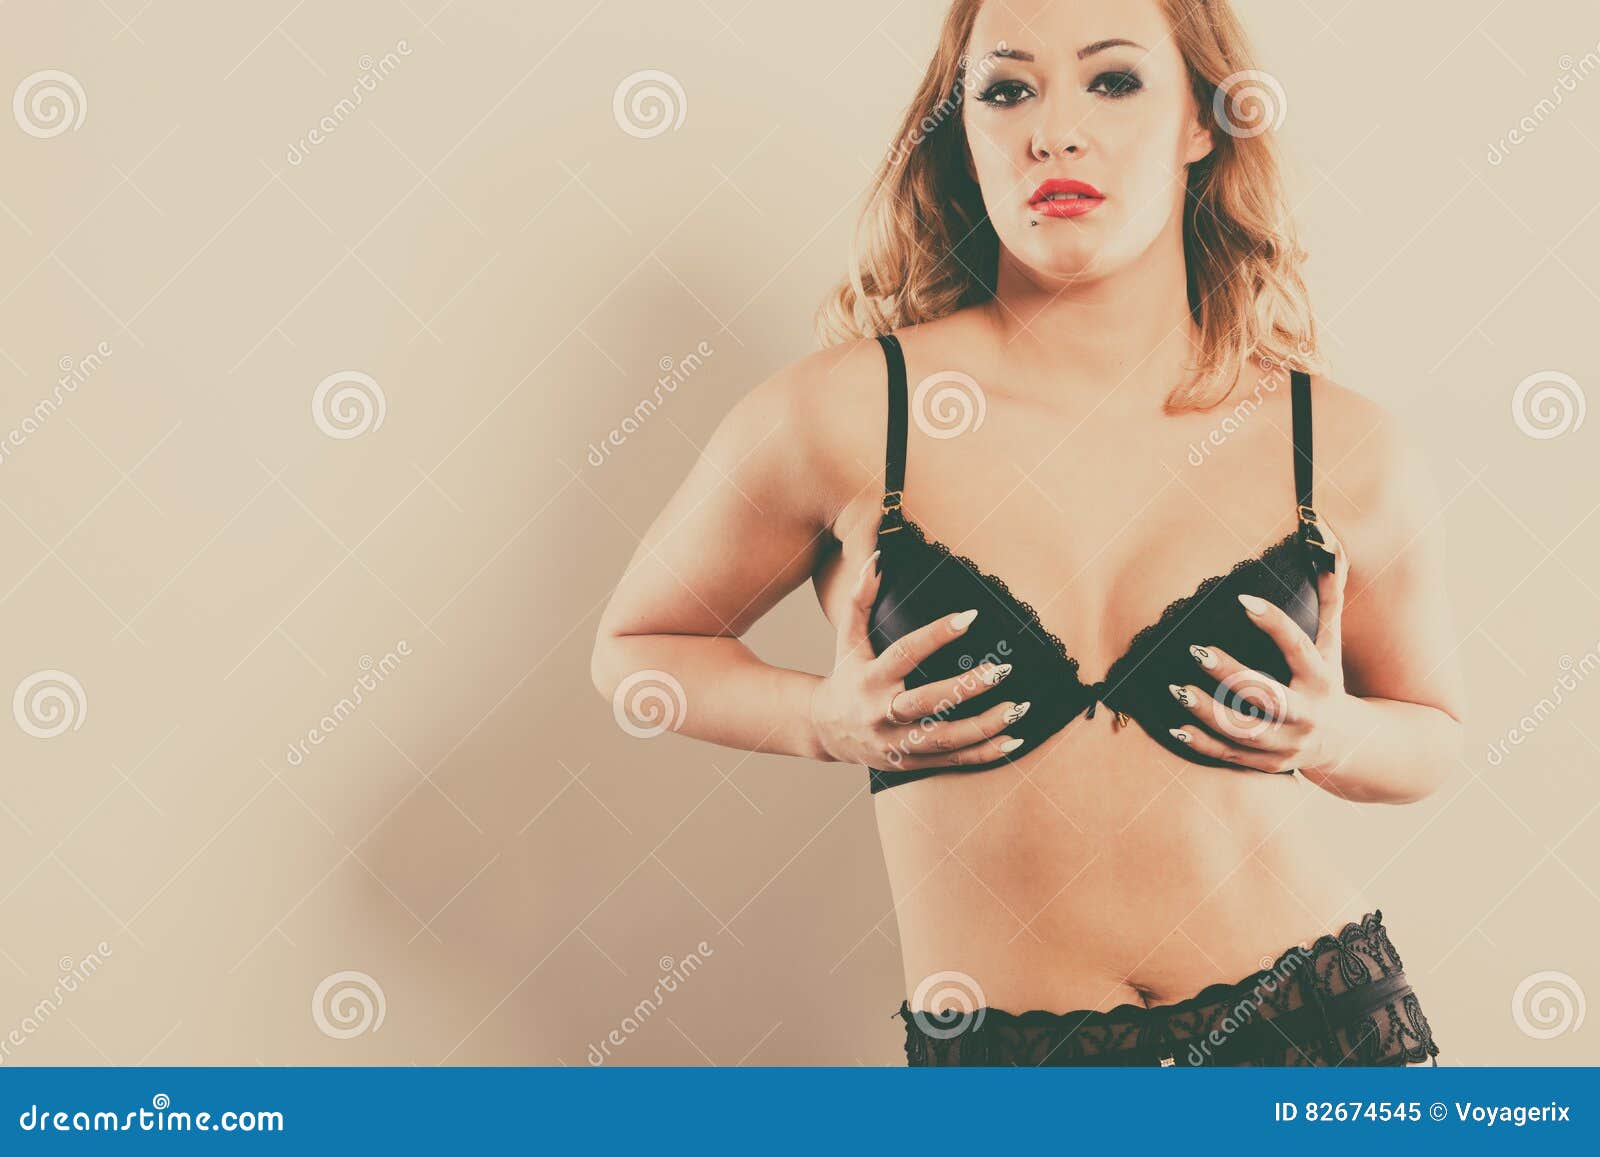 Woman Holding Touching Her Breast. Stock Image - Image of